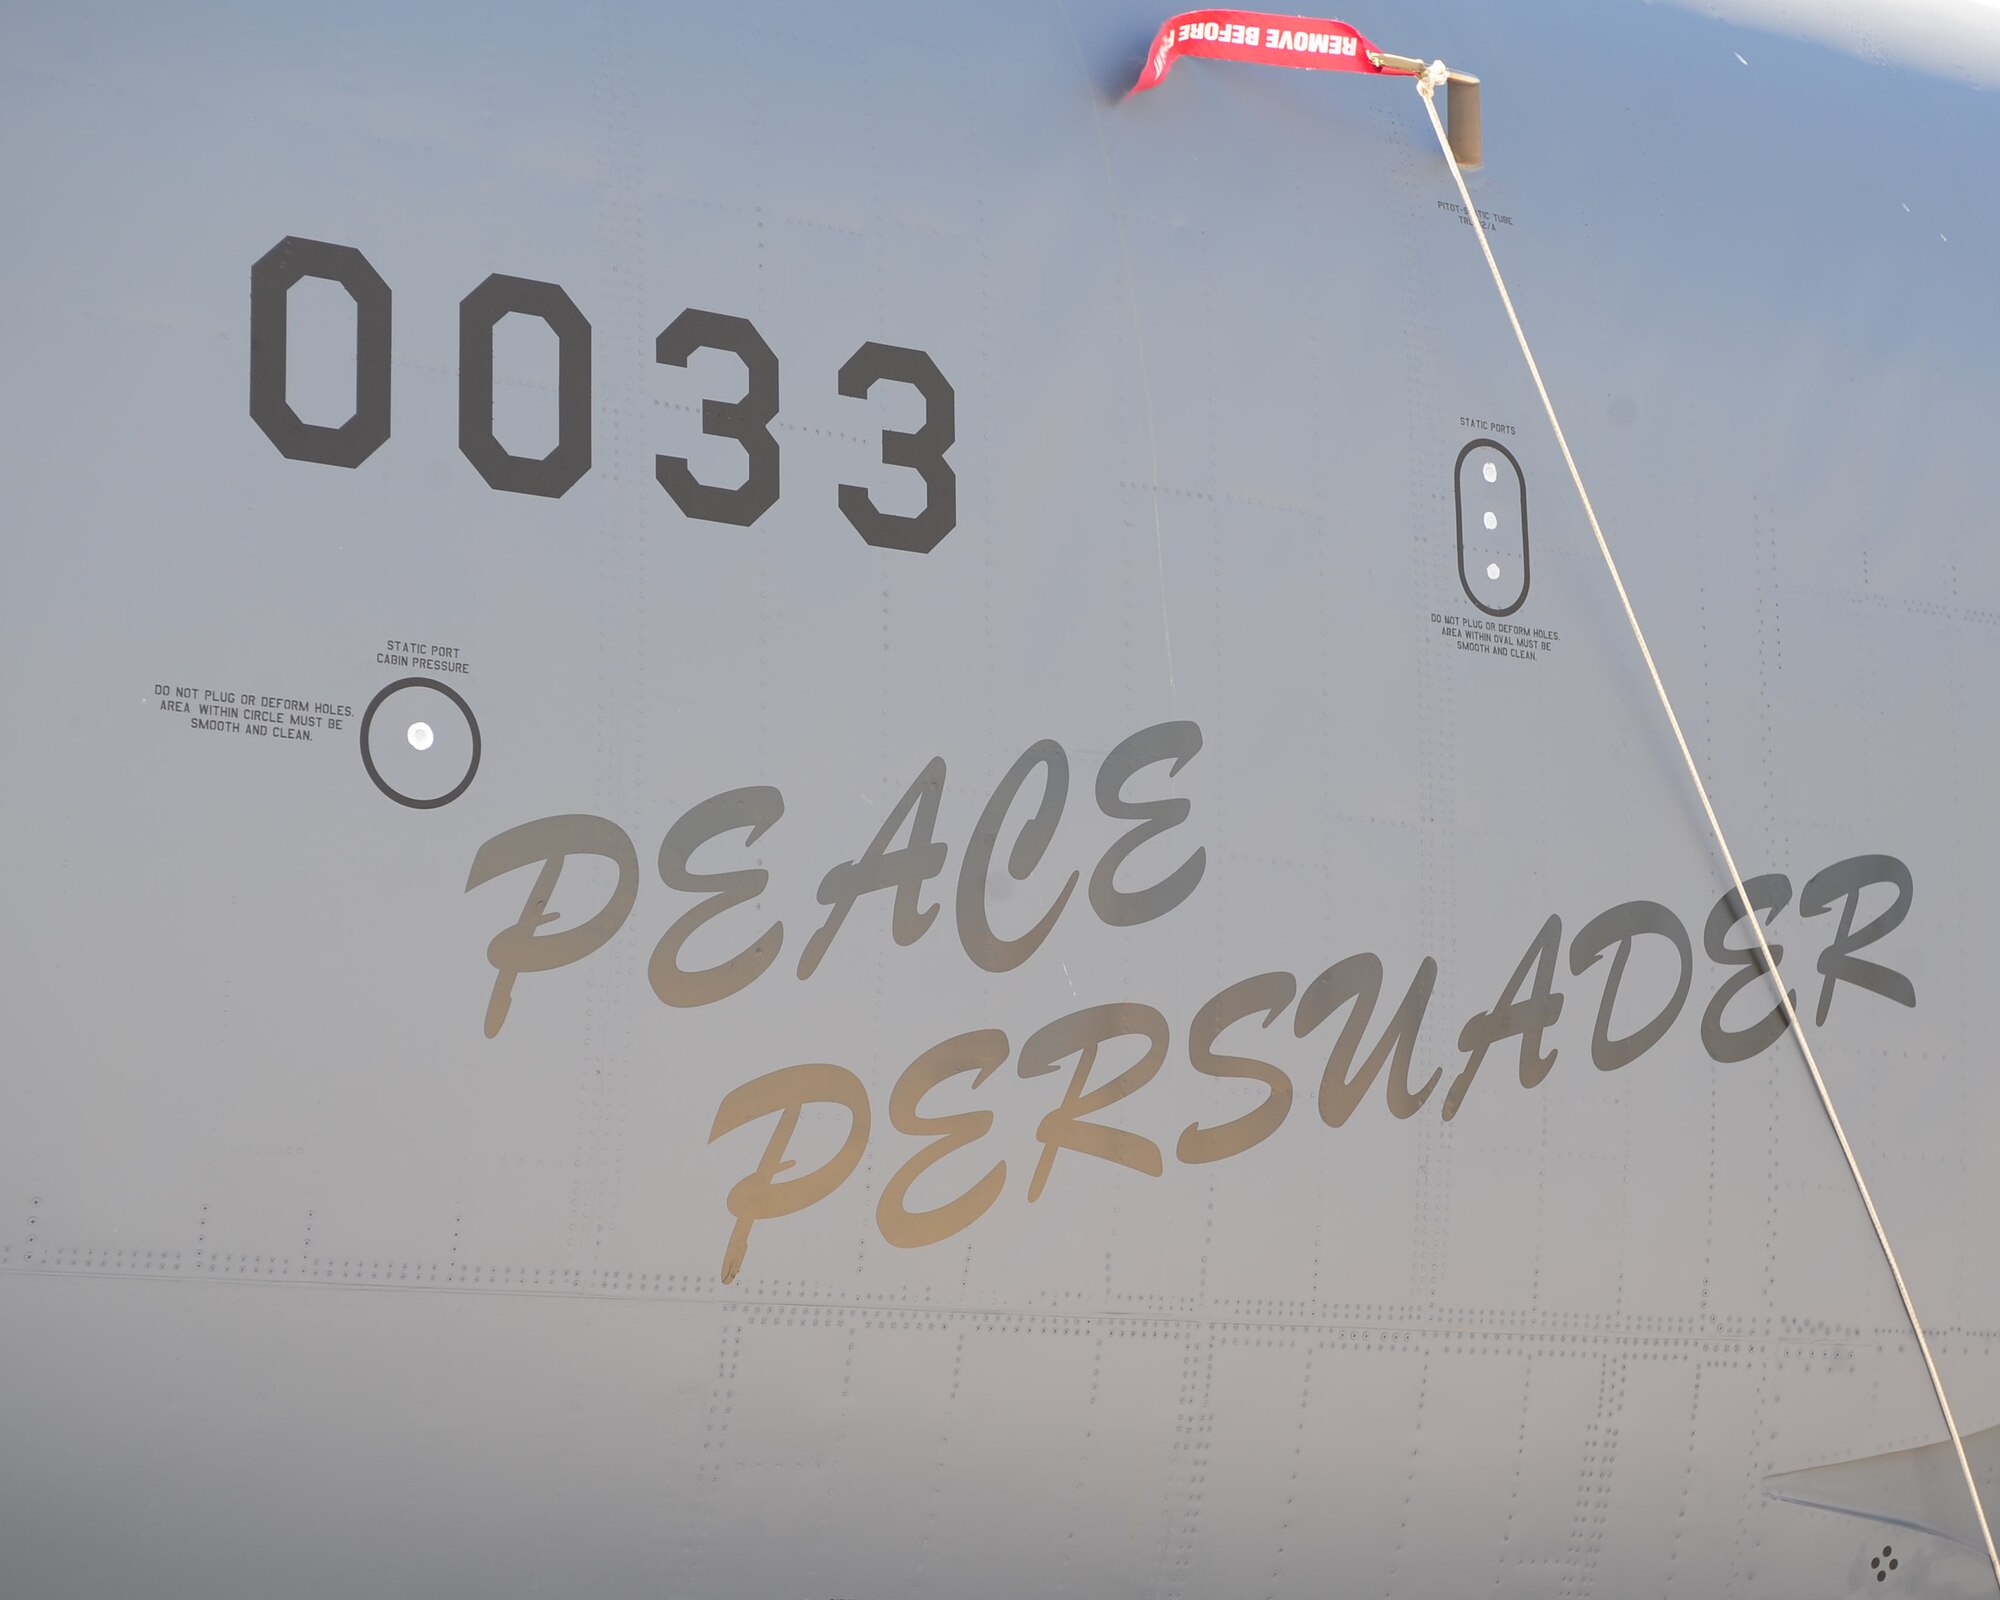 MINOT AIR FORCE BASE, N.D. -- A B-52H Stratofortess received nostalgic nose art for the 50th anniversary of its arrival to Minot AFB here Aug. 19. The name “Peace Persuader” was added for the ceremony to commemorate the airframe’s history. (U.S. Air Force photo/Senior Airman Michael J. Veloz)